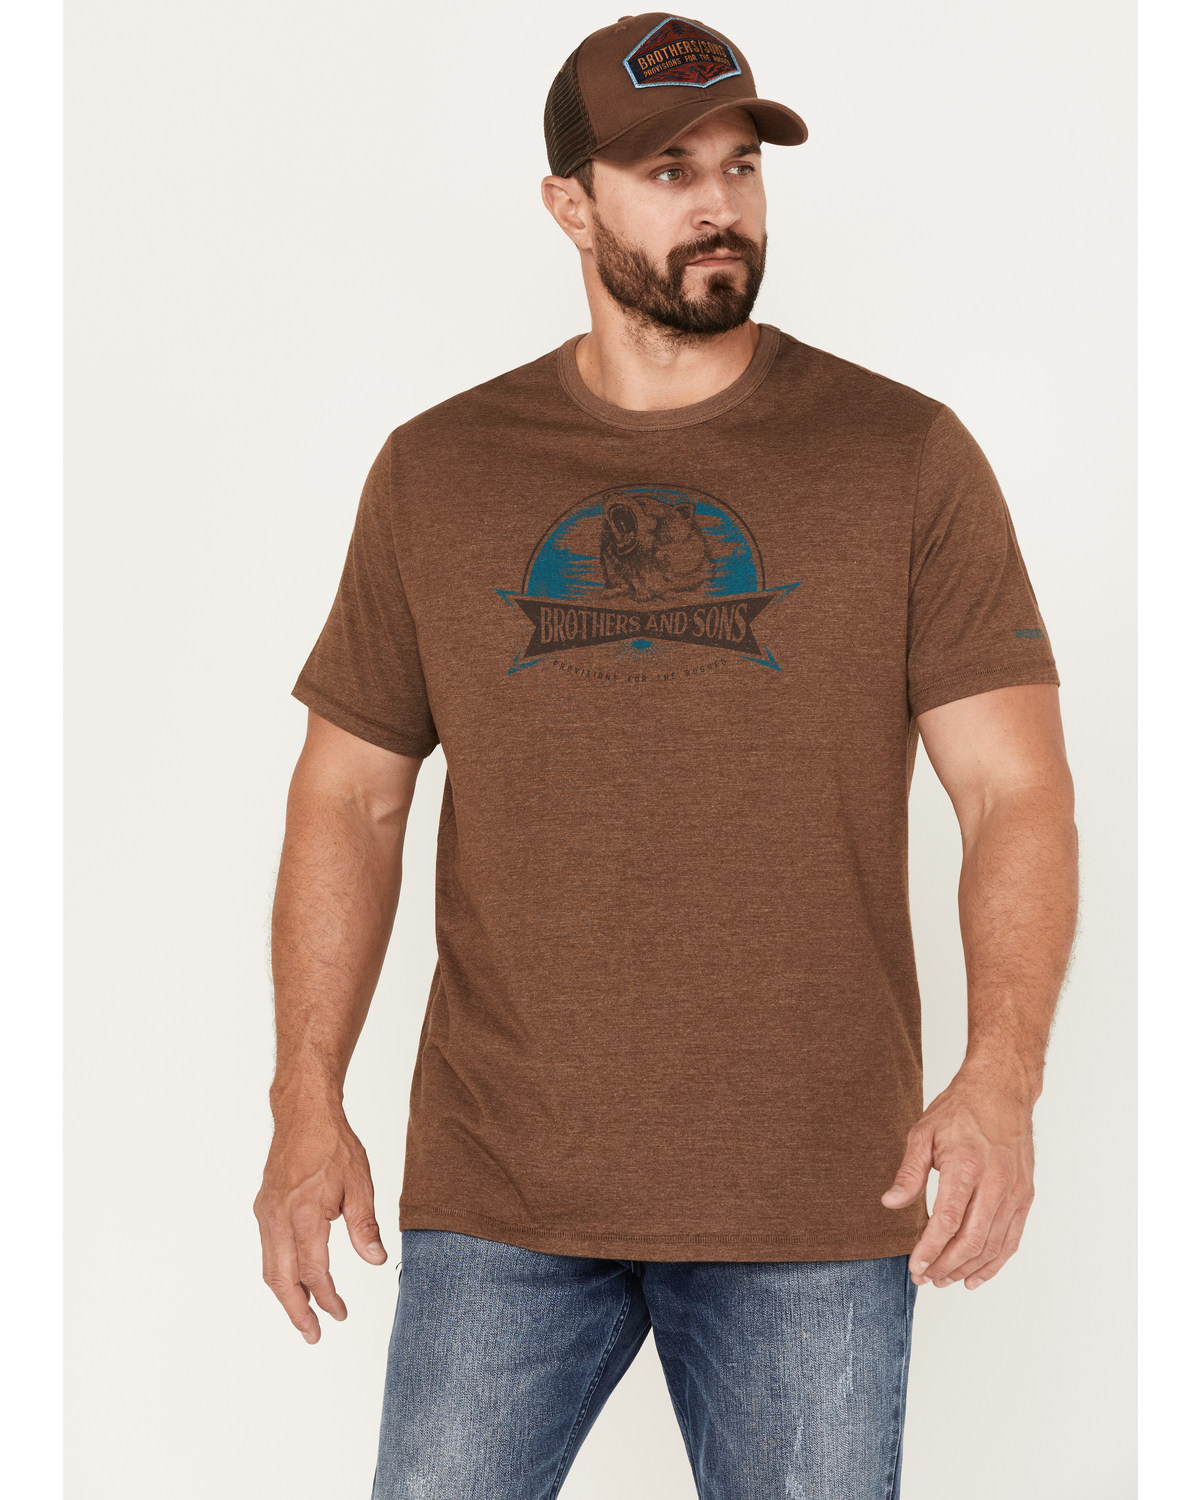 Brothers and Sons Men's Bear Logo Graphic T-Shirt